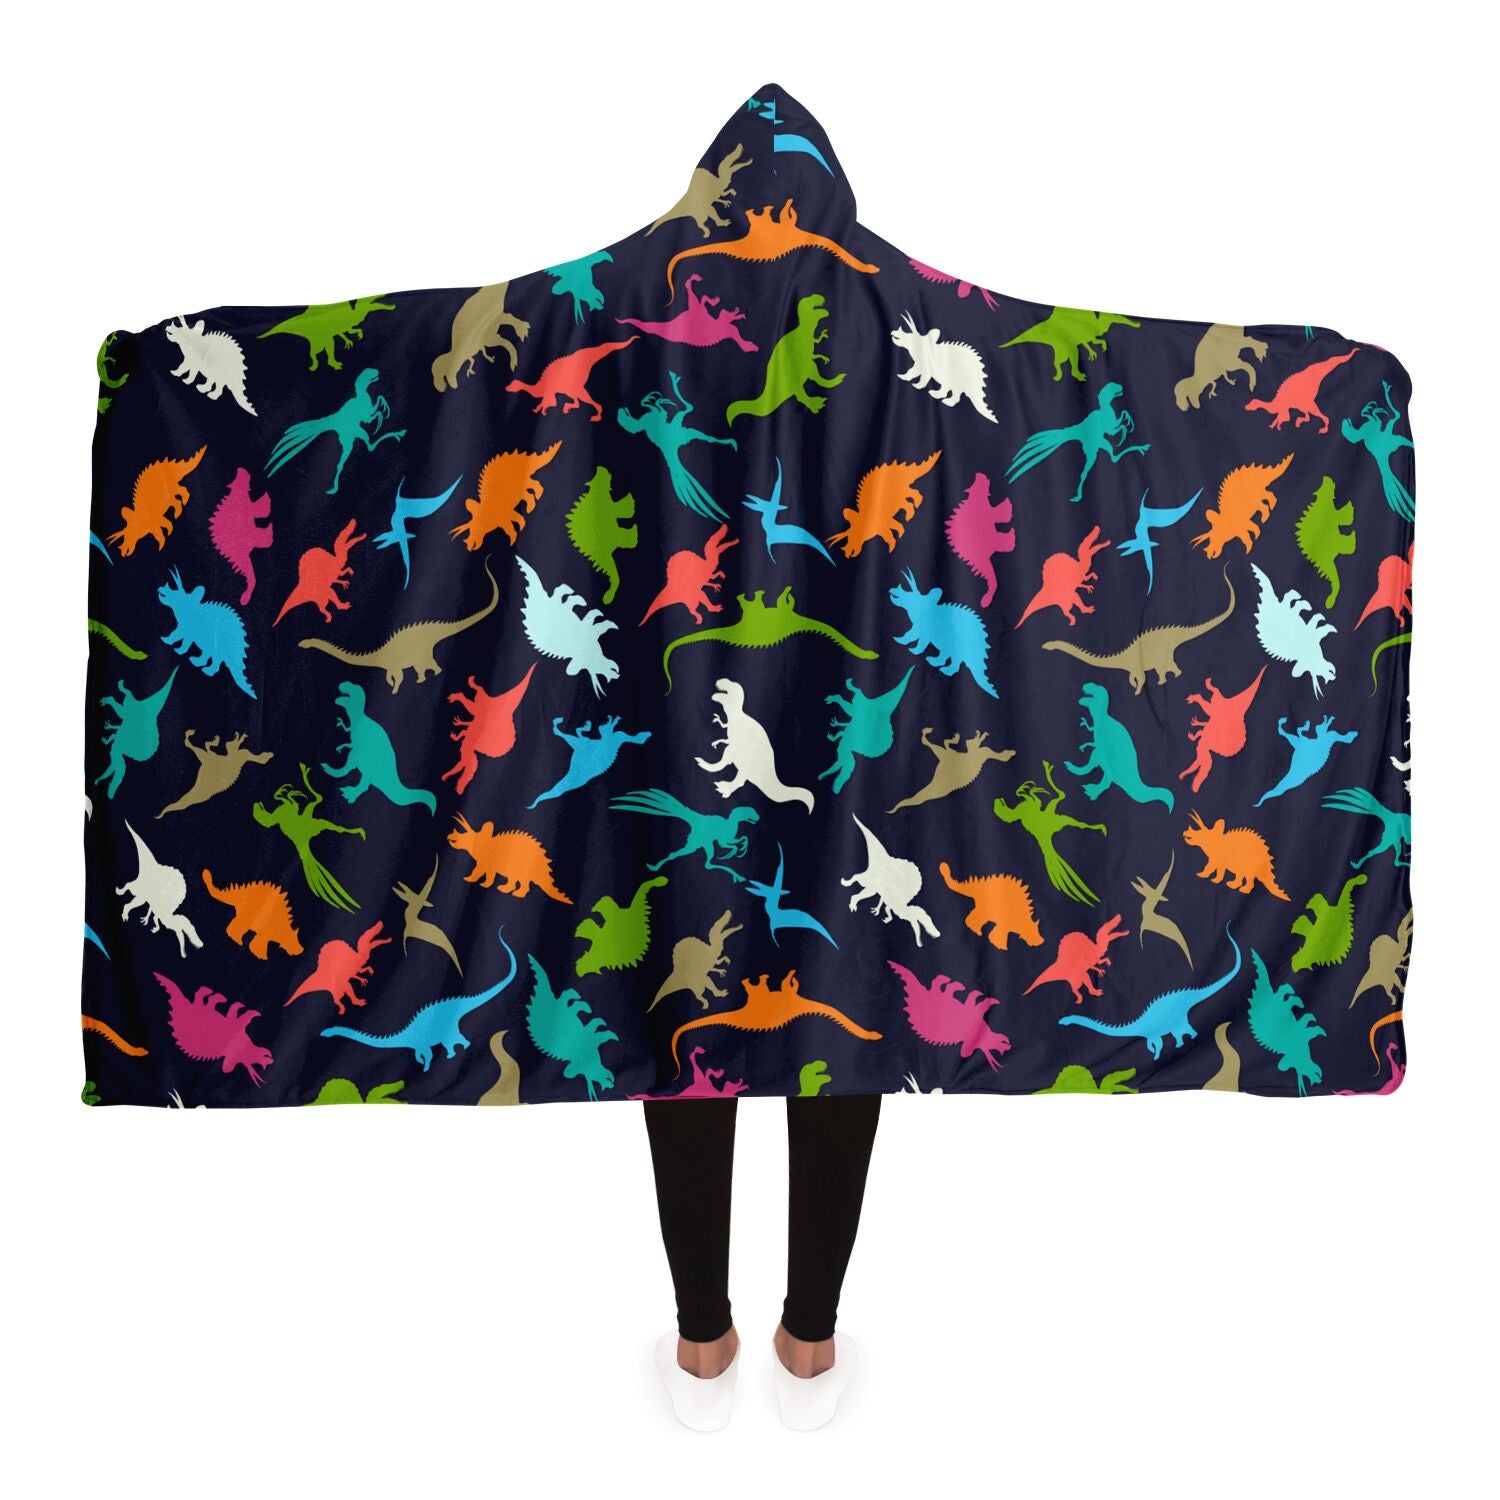 Dinosaurs Hooded Blanket, Dino Sherpa Fleece Soft Fluffy Cozy Warm Adult Men Women Kids Large Giant Wearable with Hood Gift Starcove Fashion